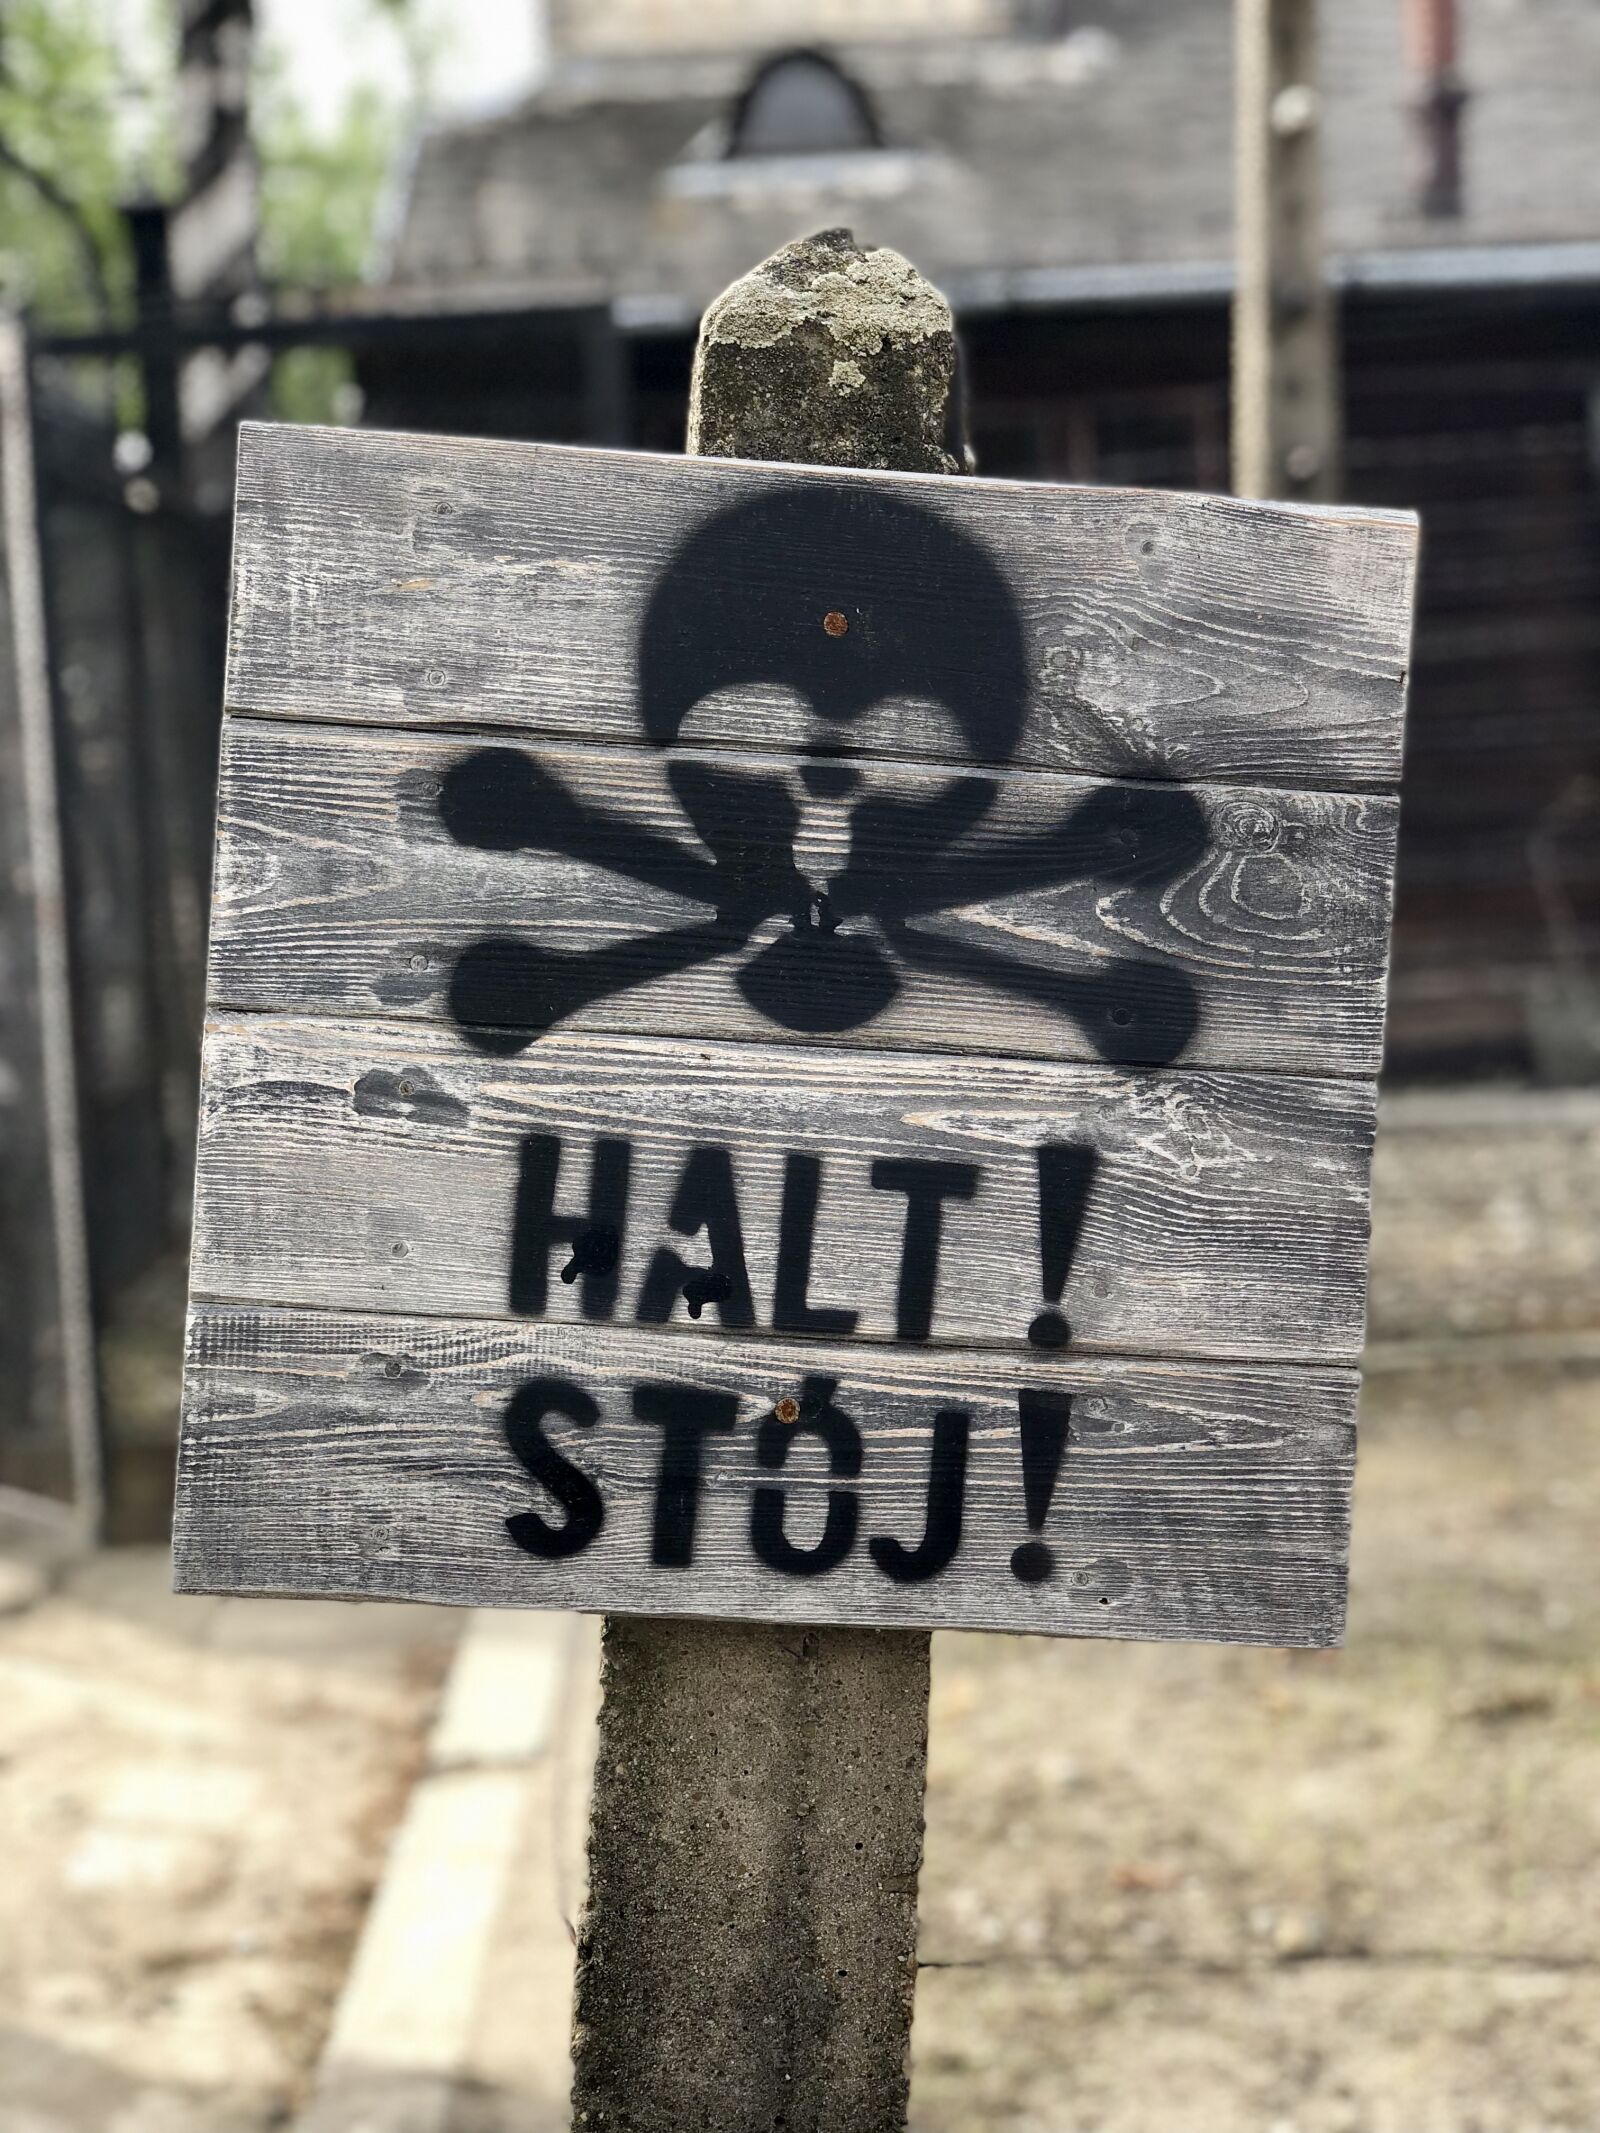 Apple iPhone X + iPhone X back dual camera 6mm f/2.4 sample photo. Auschwitz, sign, stop photography